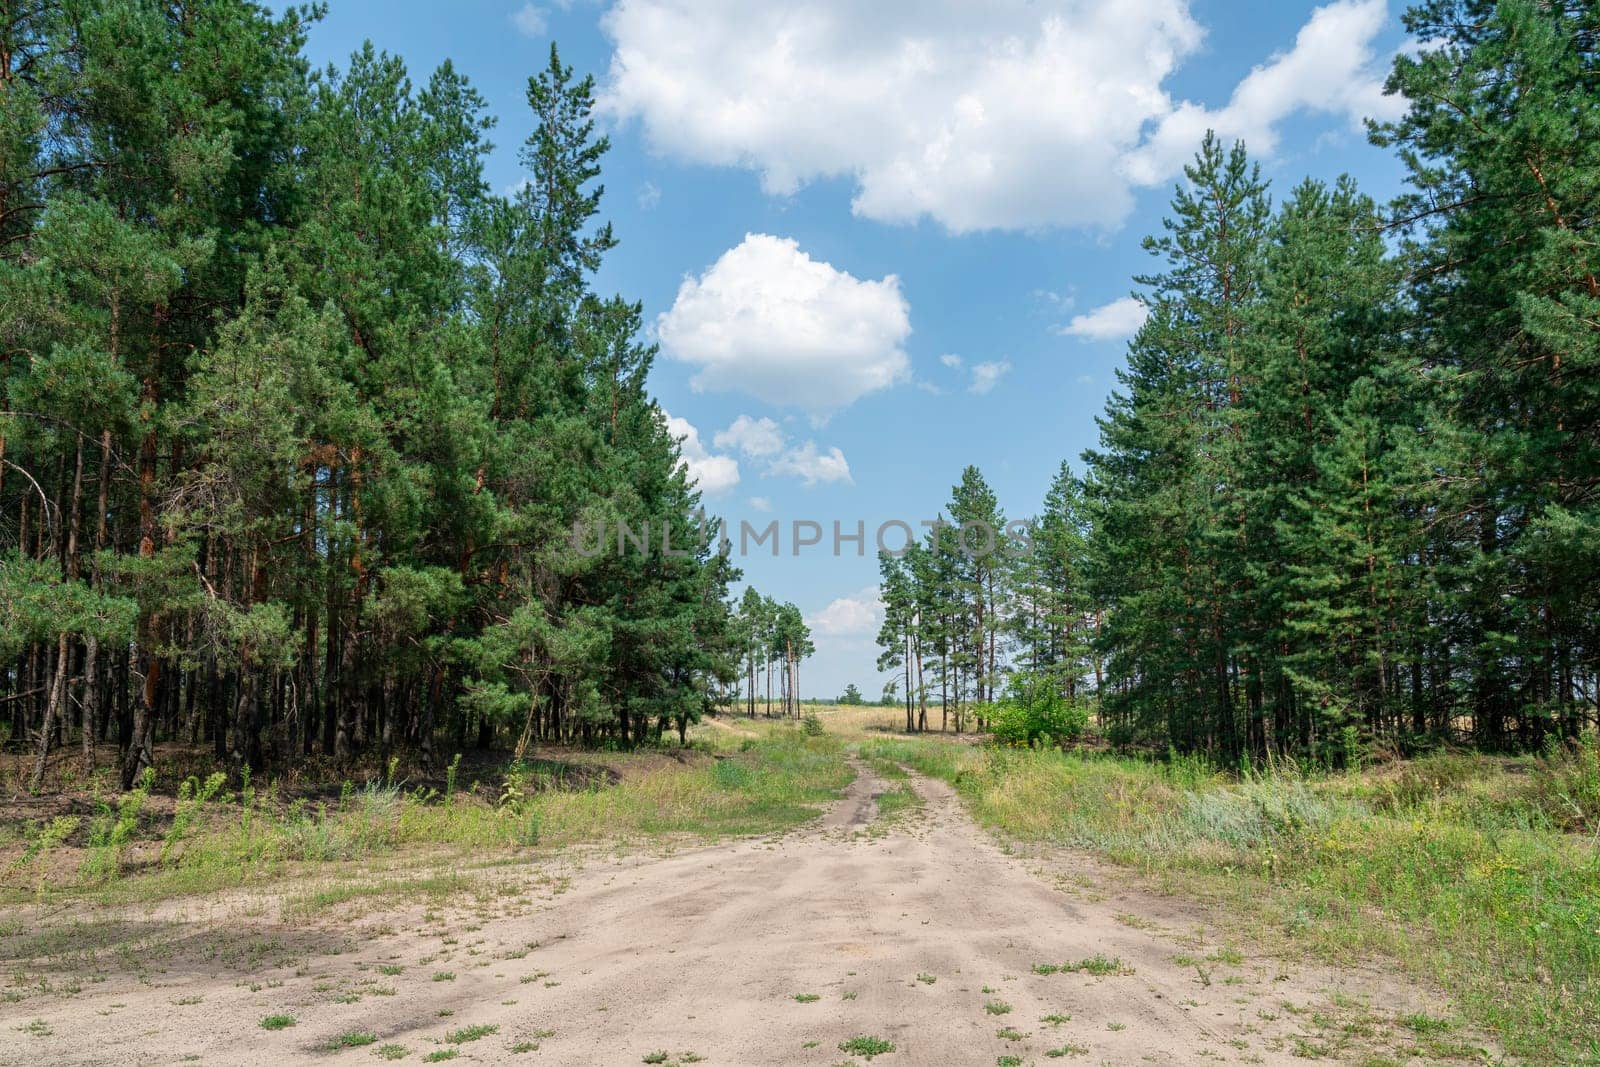 a country road in a pine forest. photo